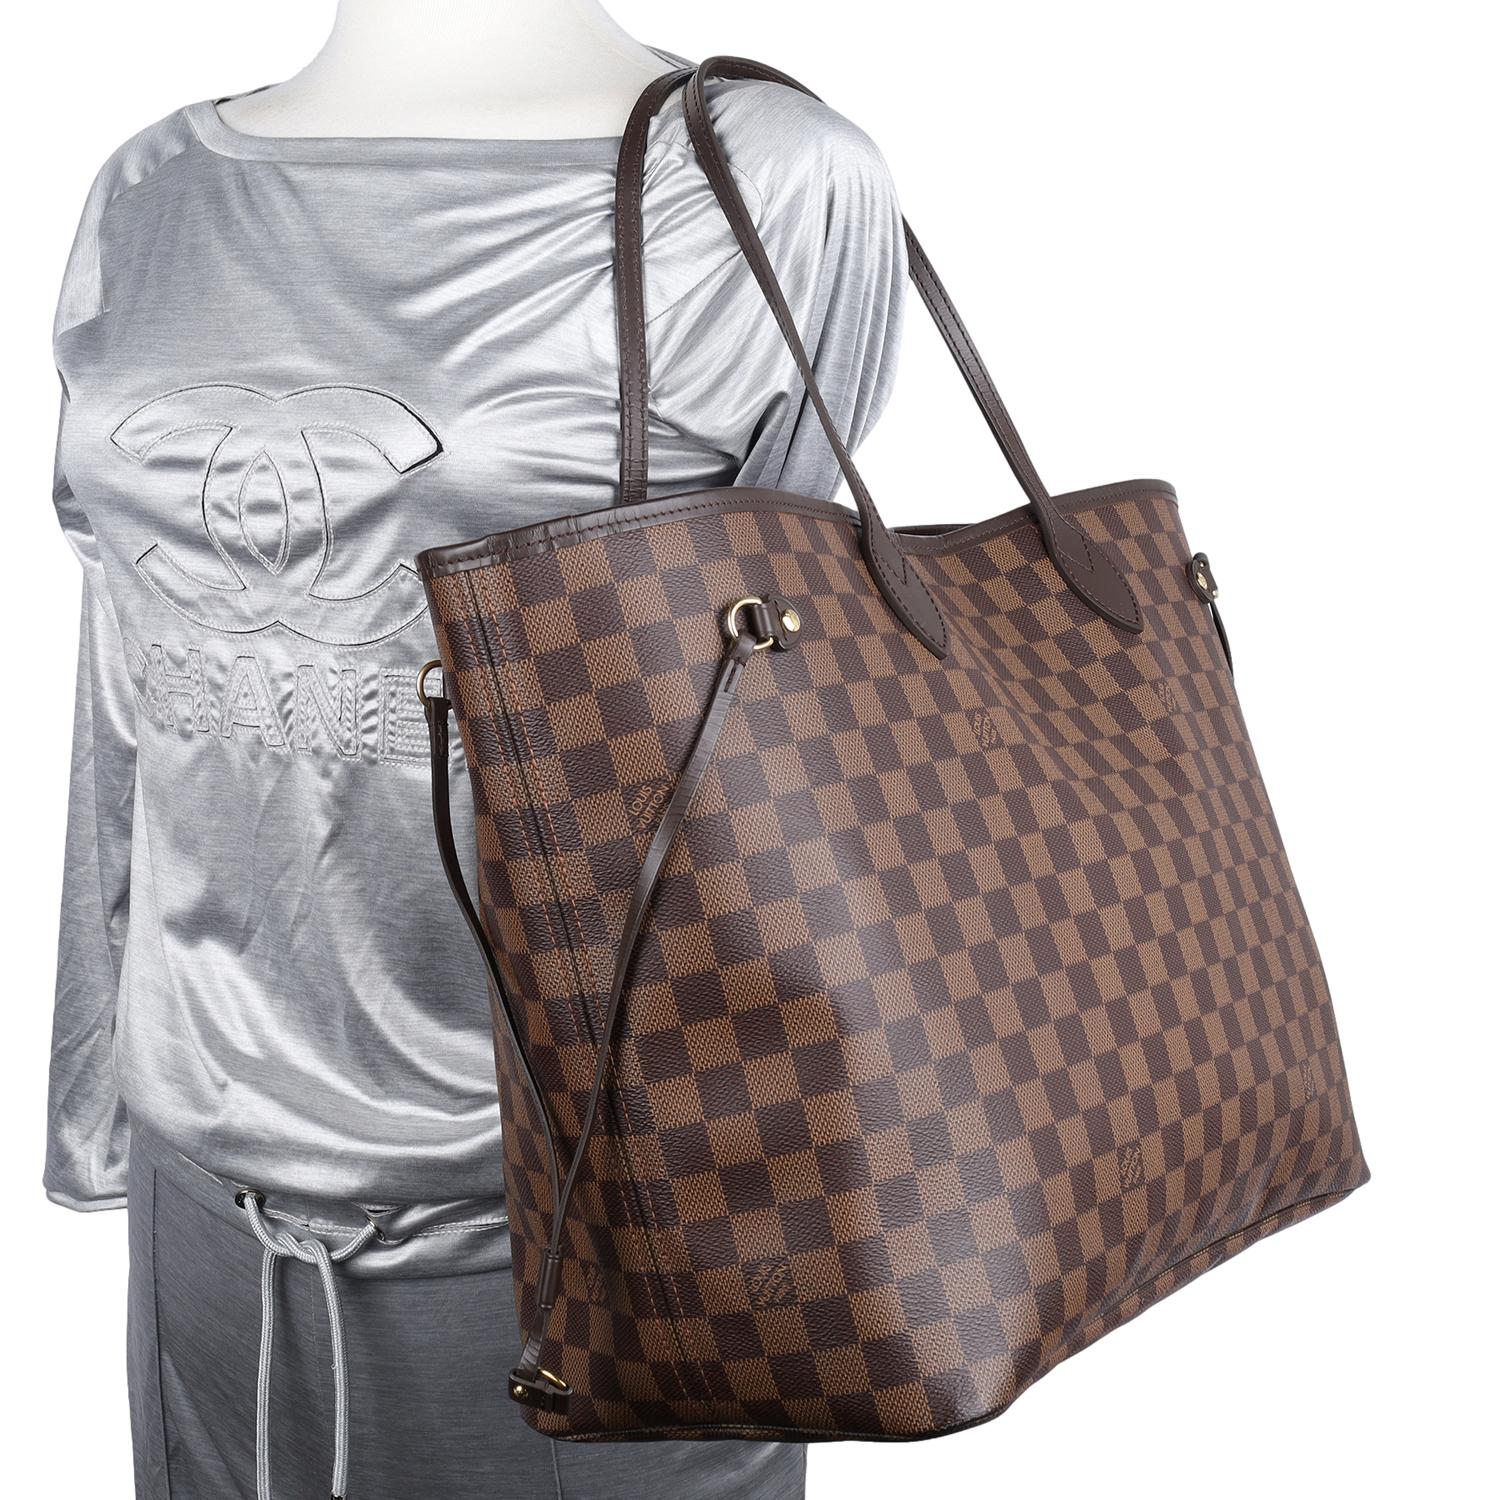 Authentic, pre-loved Louis Vuitton brown Damier Ebene Neverfull GM tote. This stylish tote is crafted of classic Louis Vuitton Damier Ebene brown canvas. Features complimentary leather shoulder straps, trim, side cinch cords, and polished brass